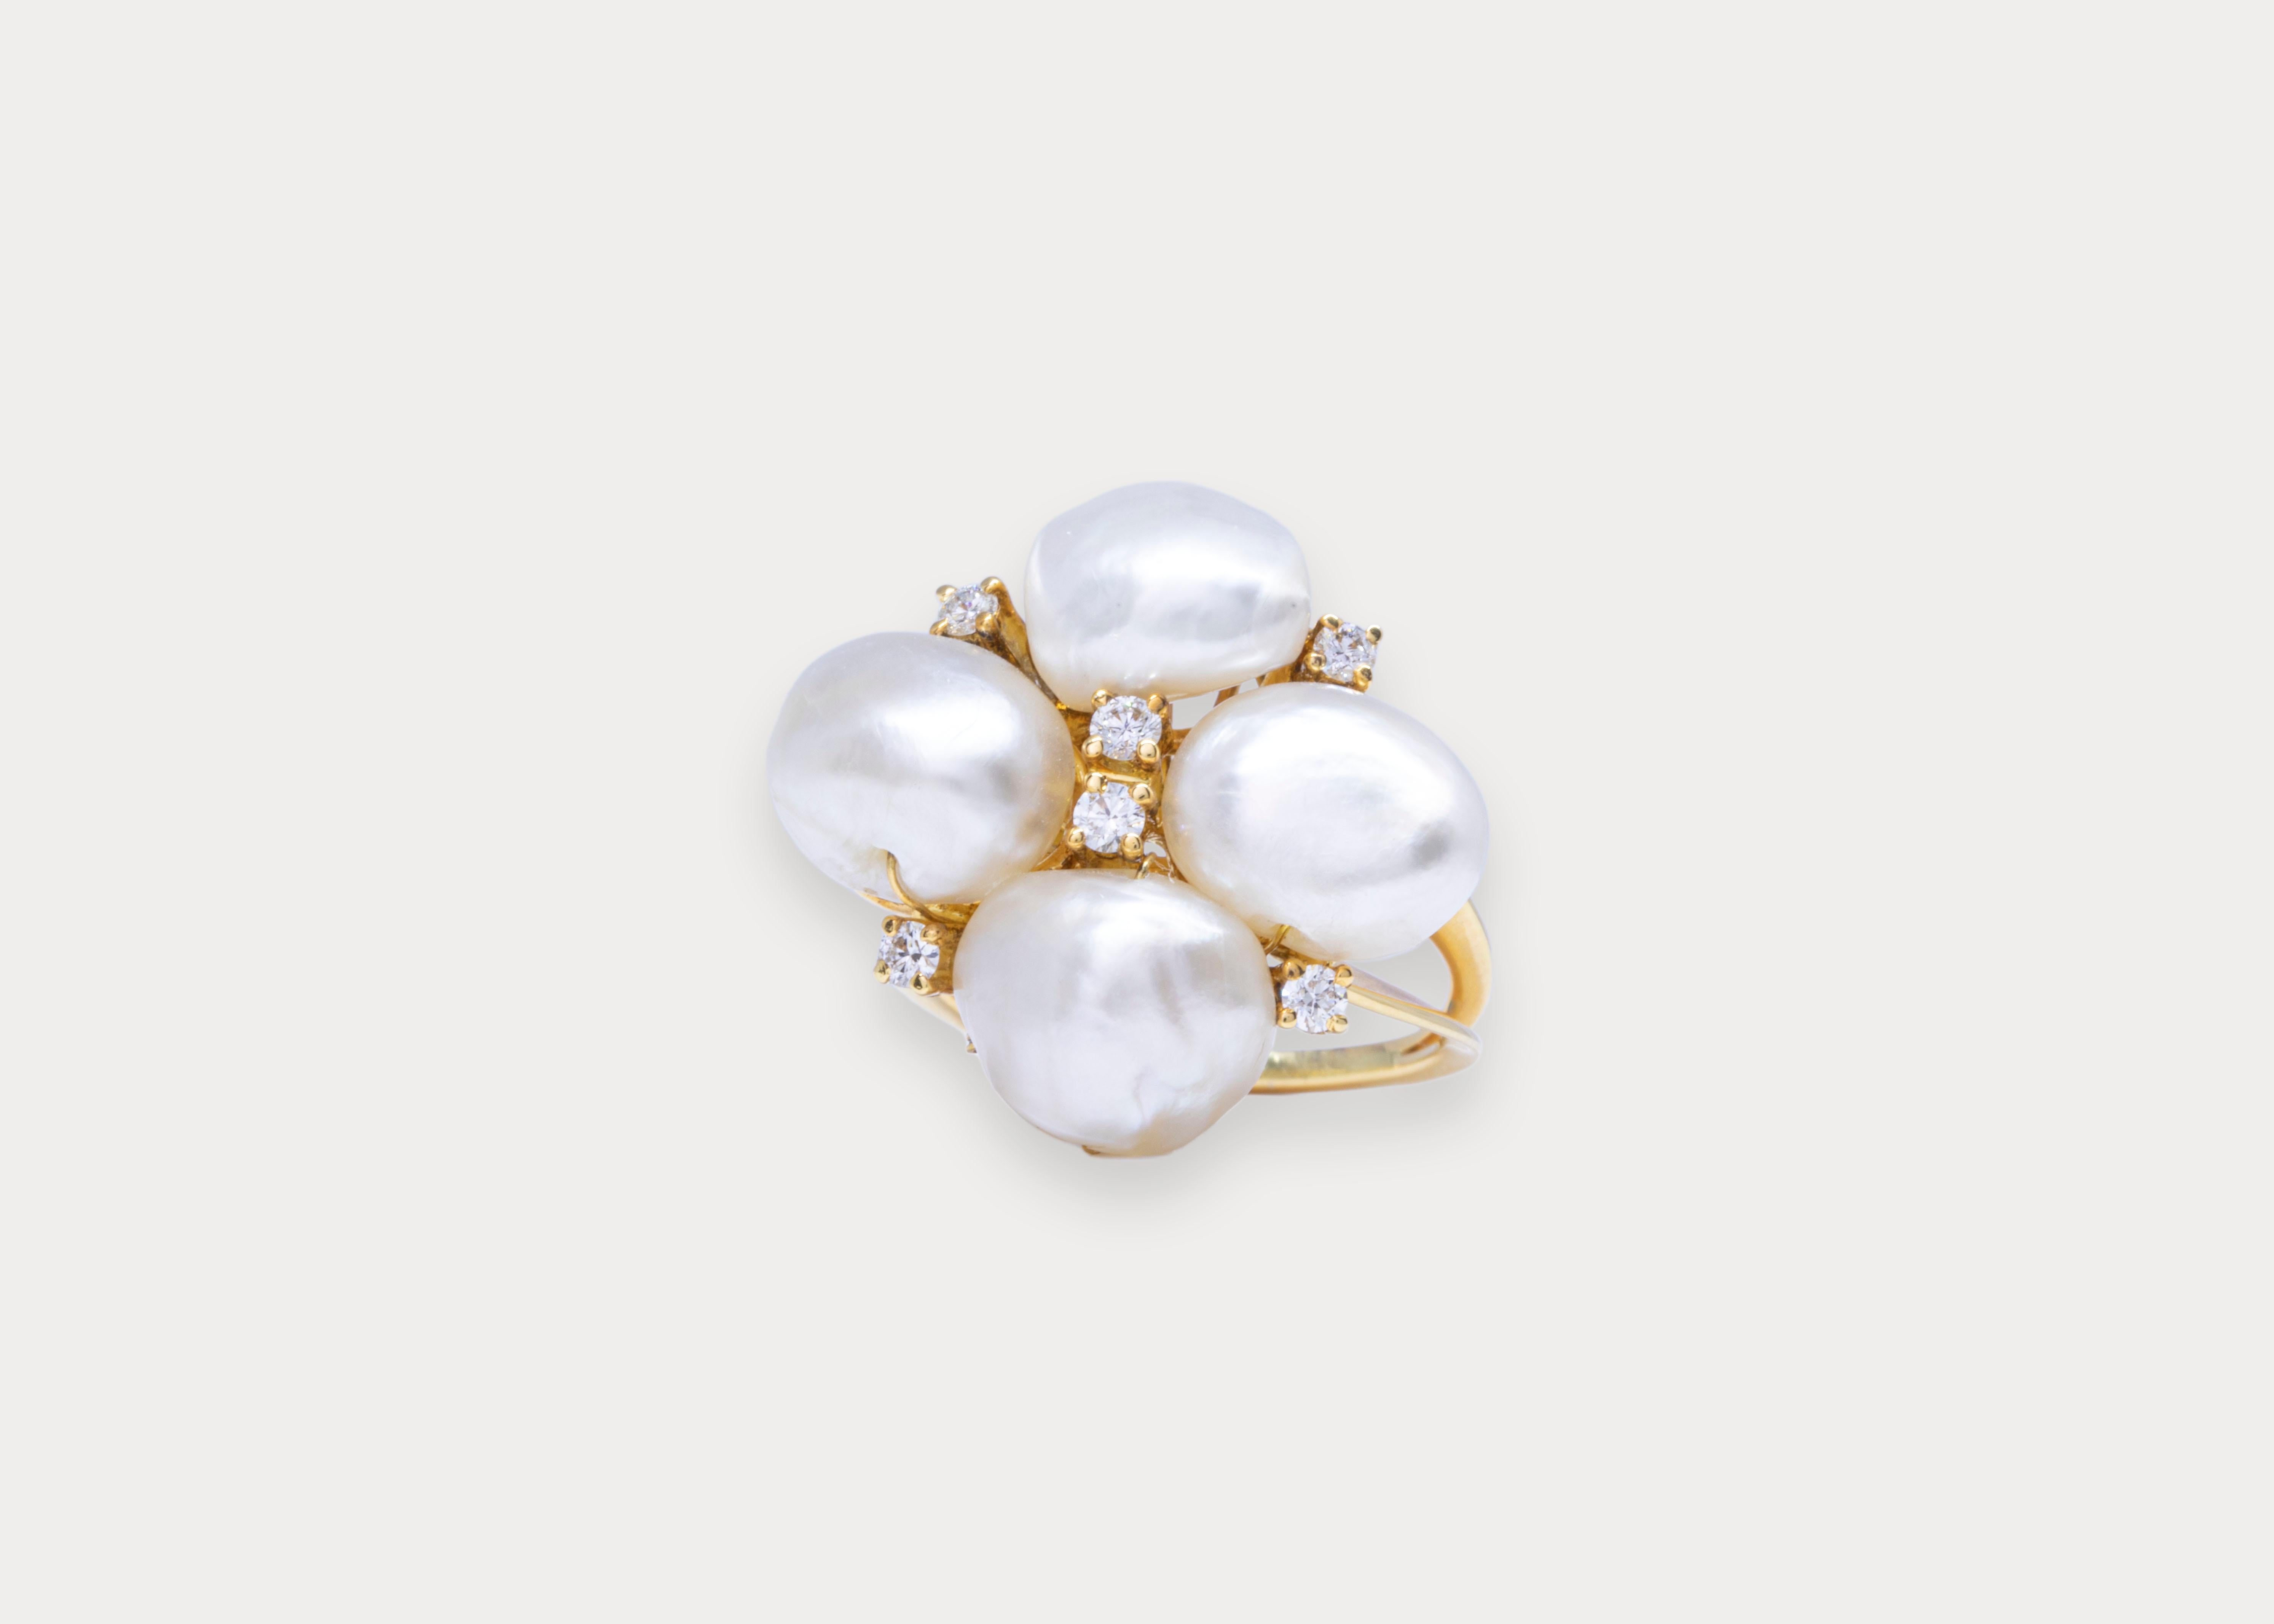 A simple statement ring...
A clover of 10mm natural pearls of similar colors and lusters sit on a 18k yellow gold throne.
6 VS1 diamonds are scattered between the pearls.

Gold Weight: 5.4 g
Pearl Weight: 17.84 ct.
Diamond Weight: 0.22 ct.

